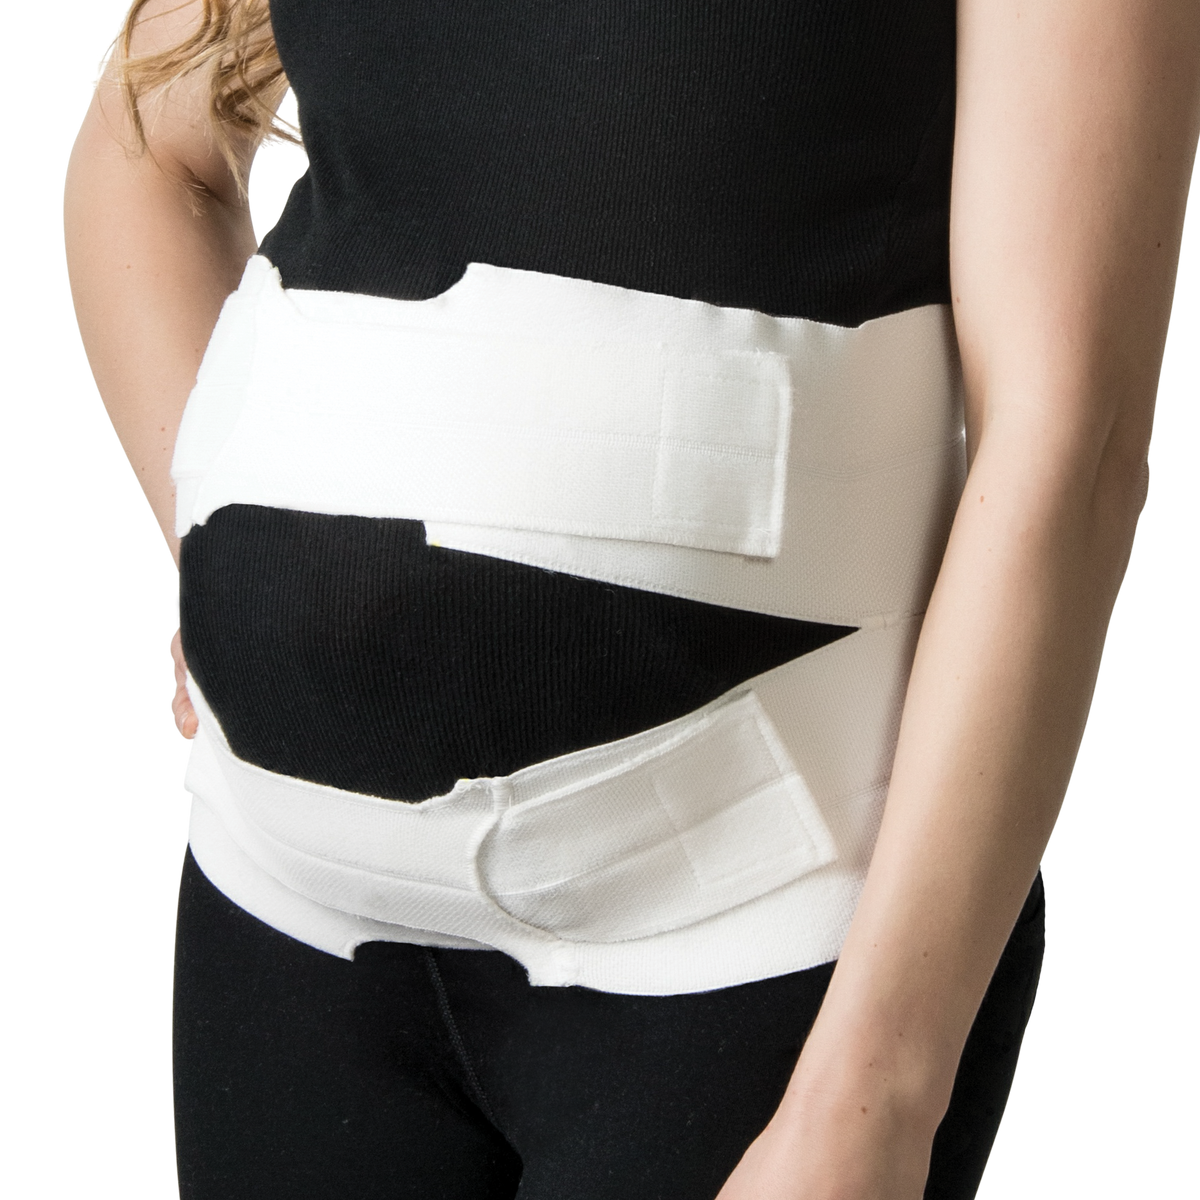 AT Surgical 6 Inches Wide Womens Rib Belt